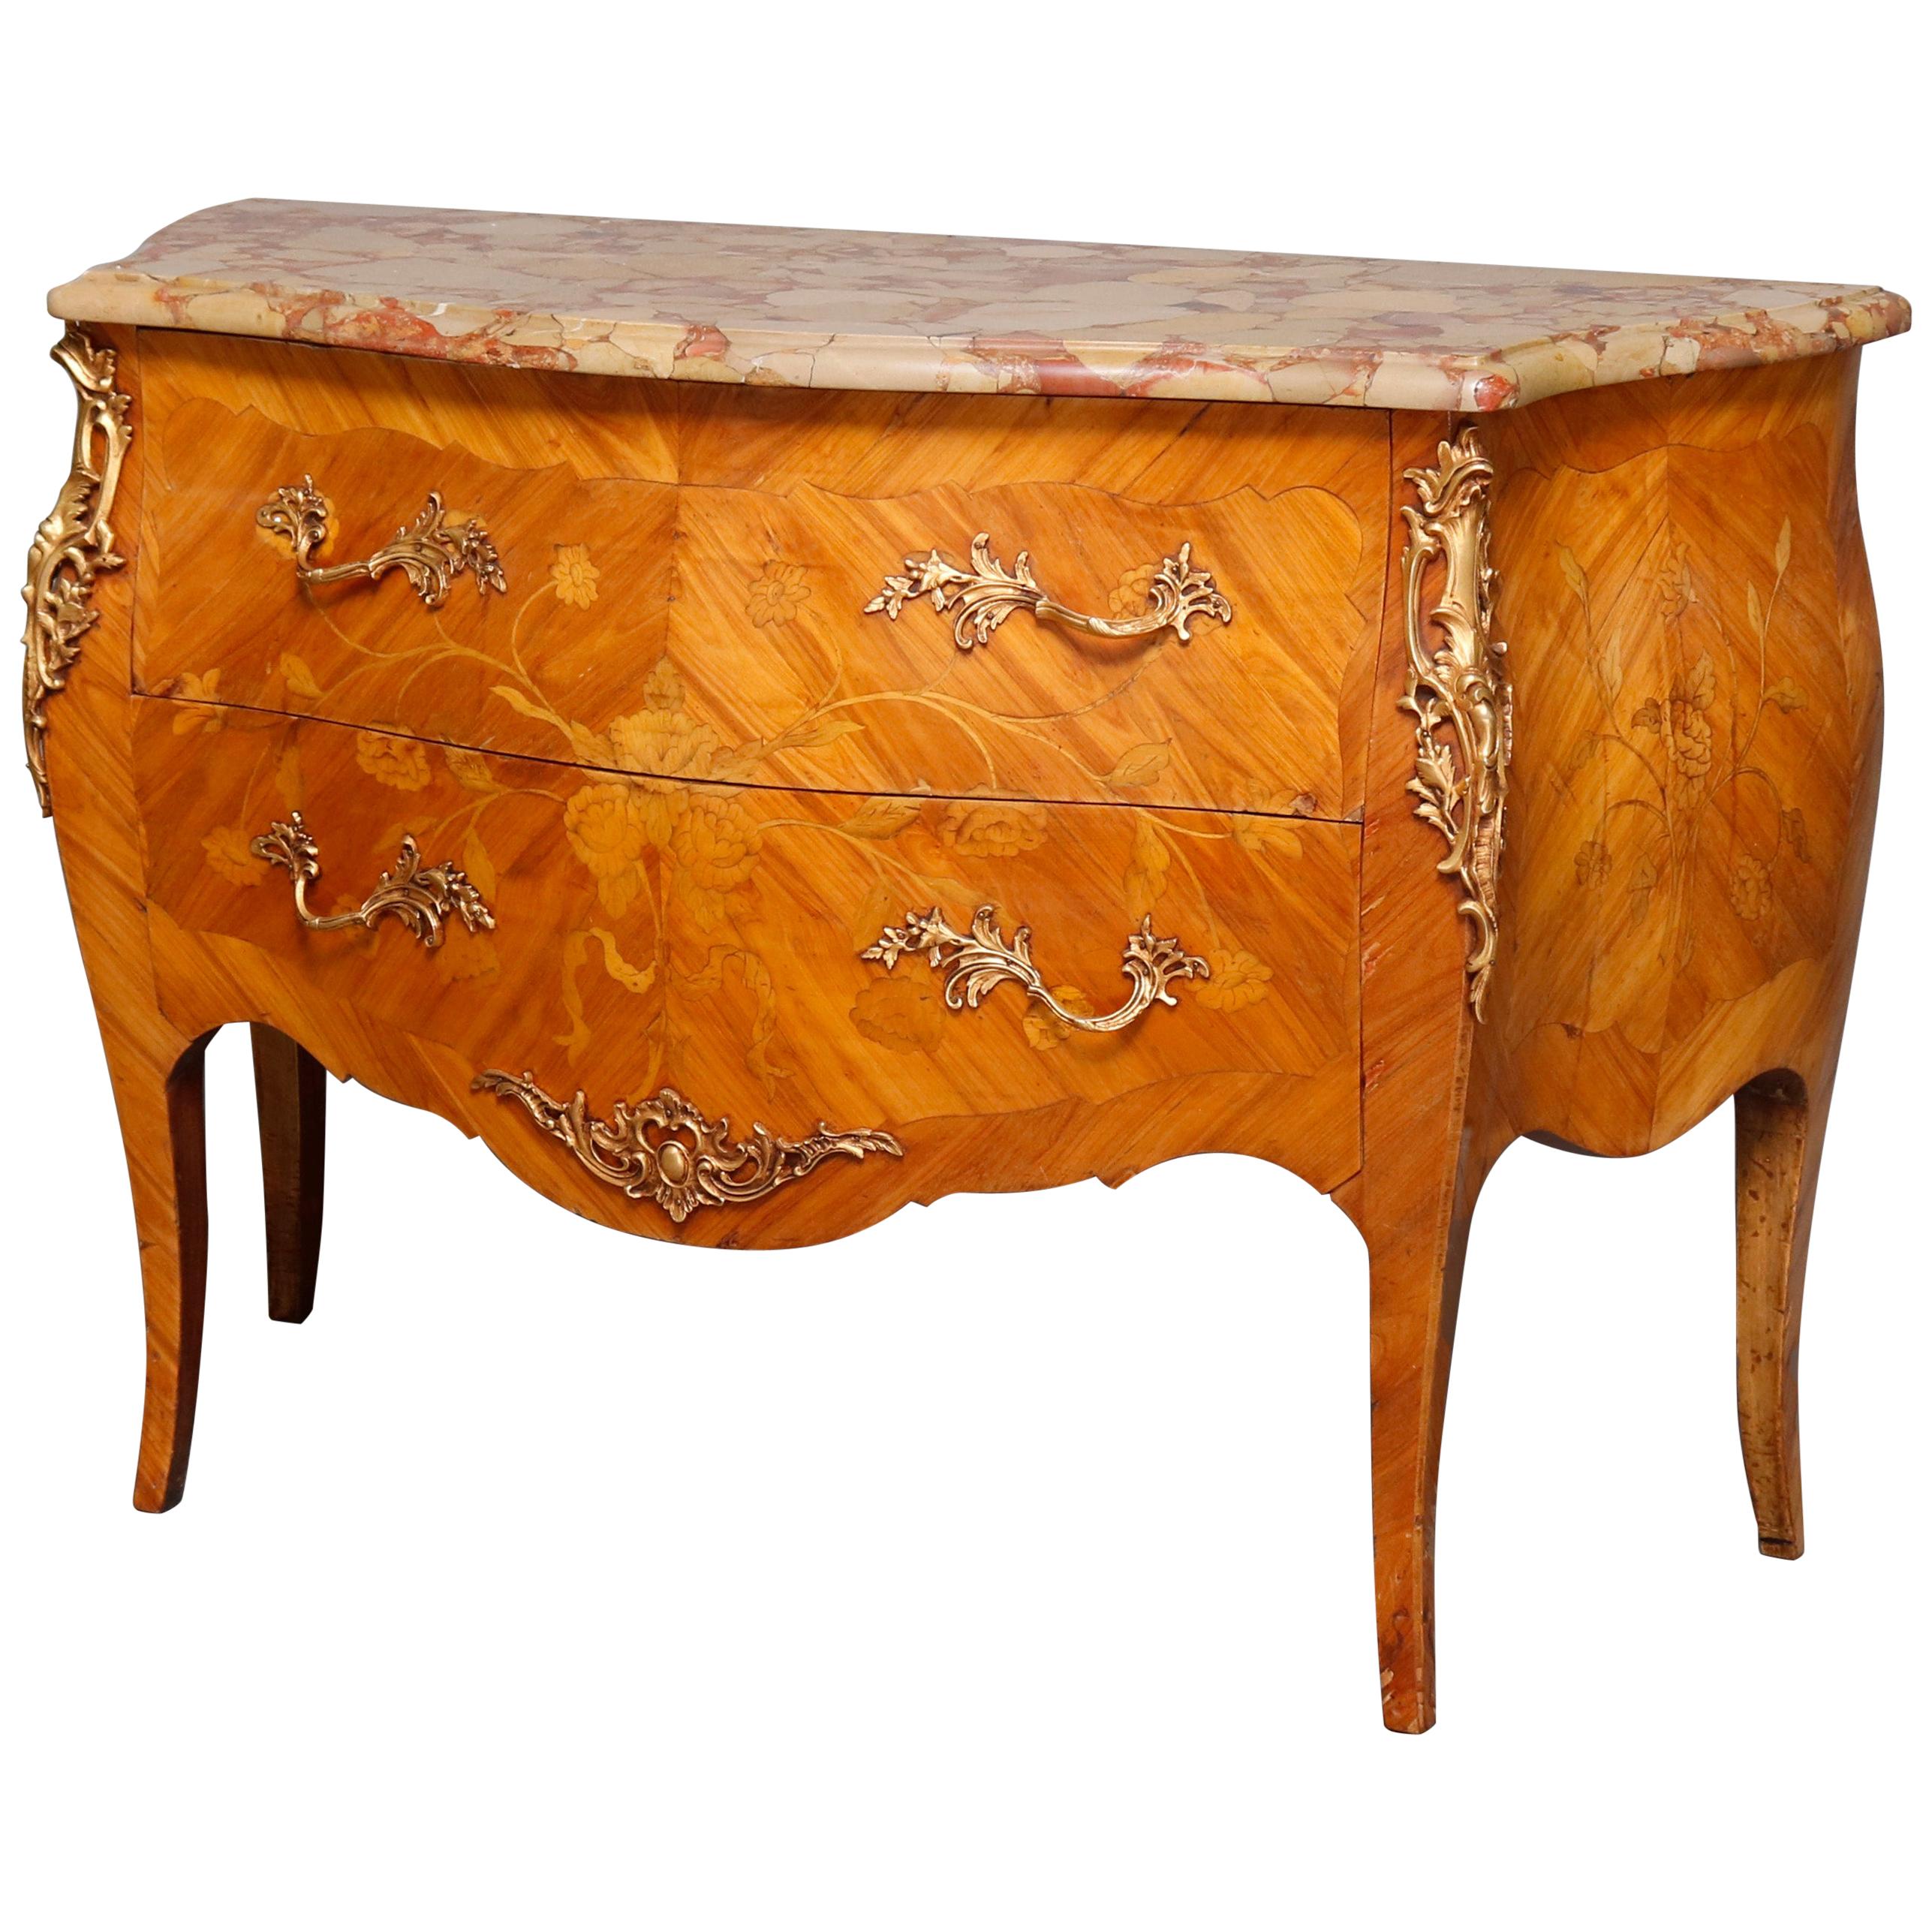 French Louis XV Inlaid Kingwood, Marble & Ormolu Bombe Commode, 20th Century